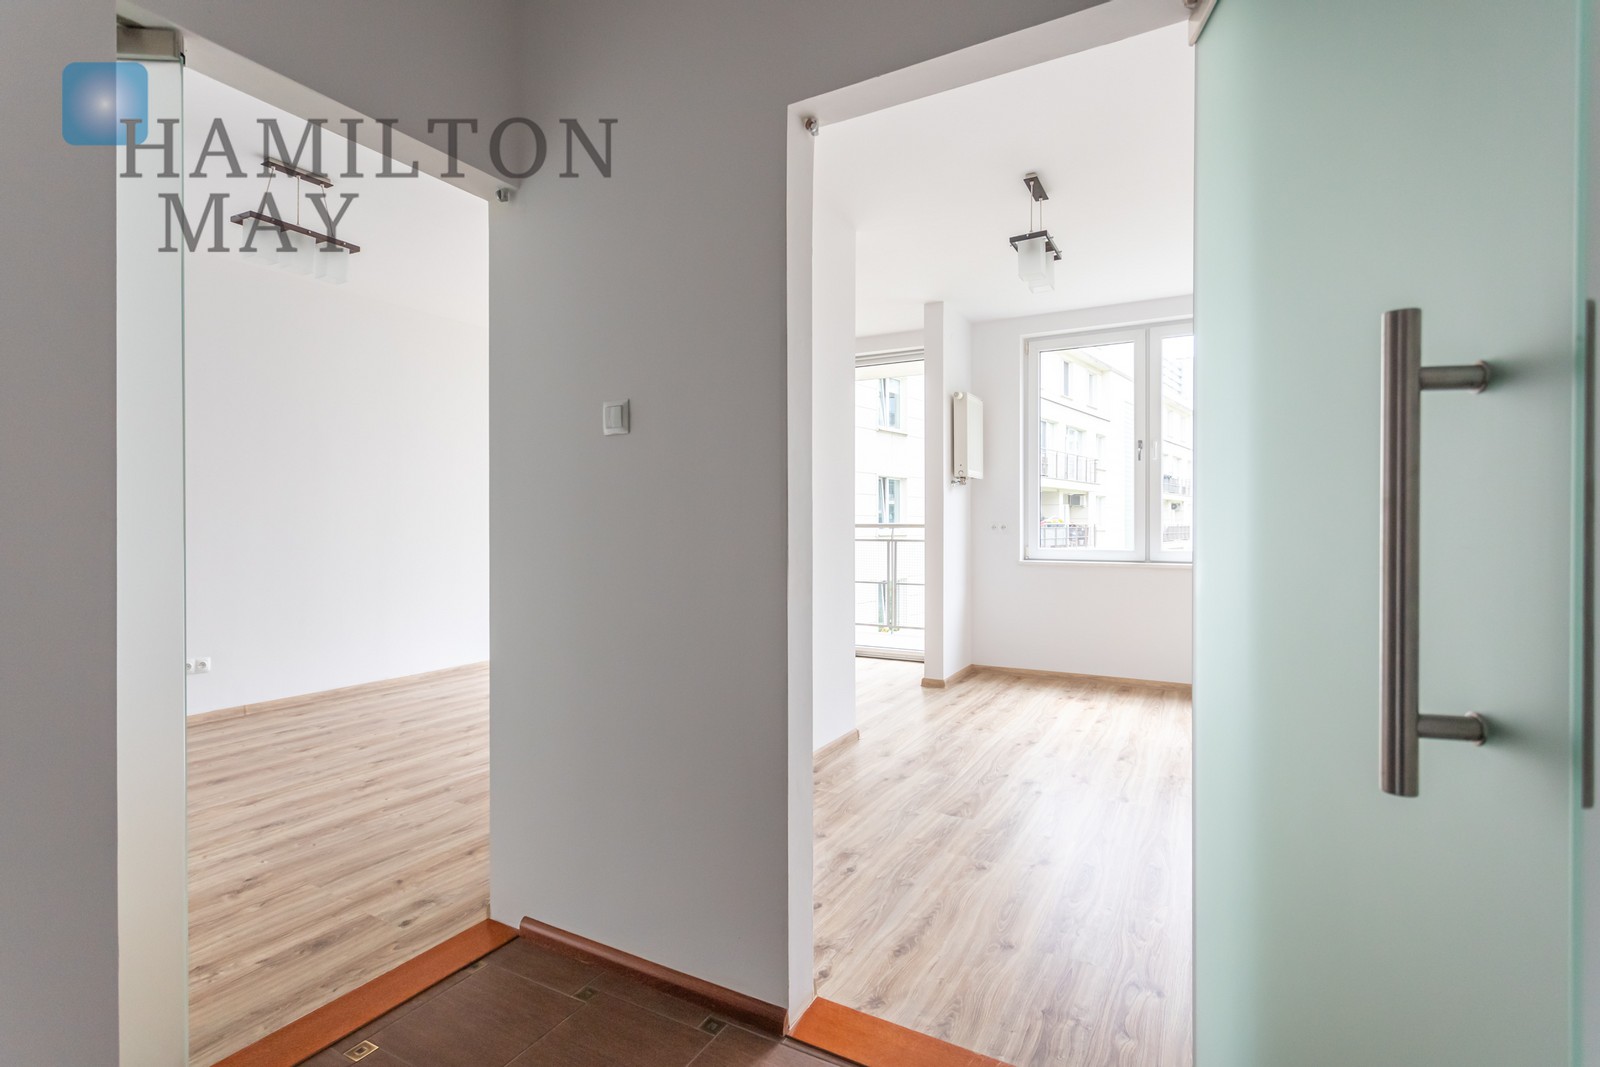 A four-room apartment for sale in Stary Żoliborz  Warsaw for sale